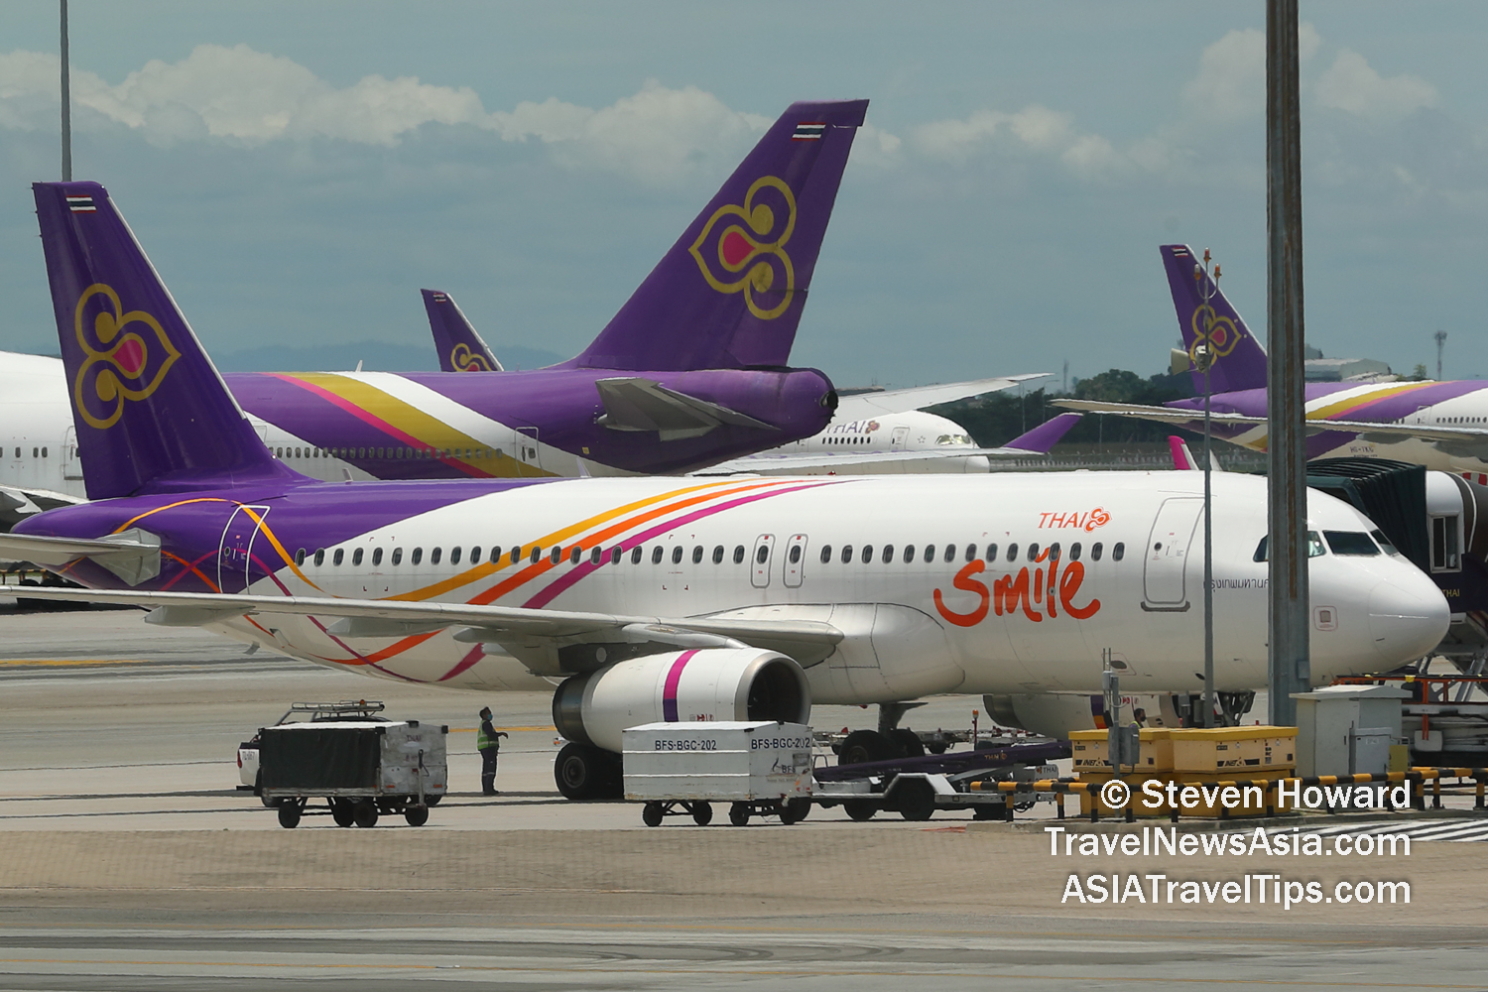 Thai Smile and Thai Airways aircraft at BKK. Picture by Steven Howard of TravelNewsAsia.com Click to enlarge.